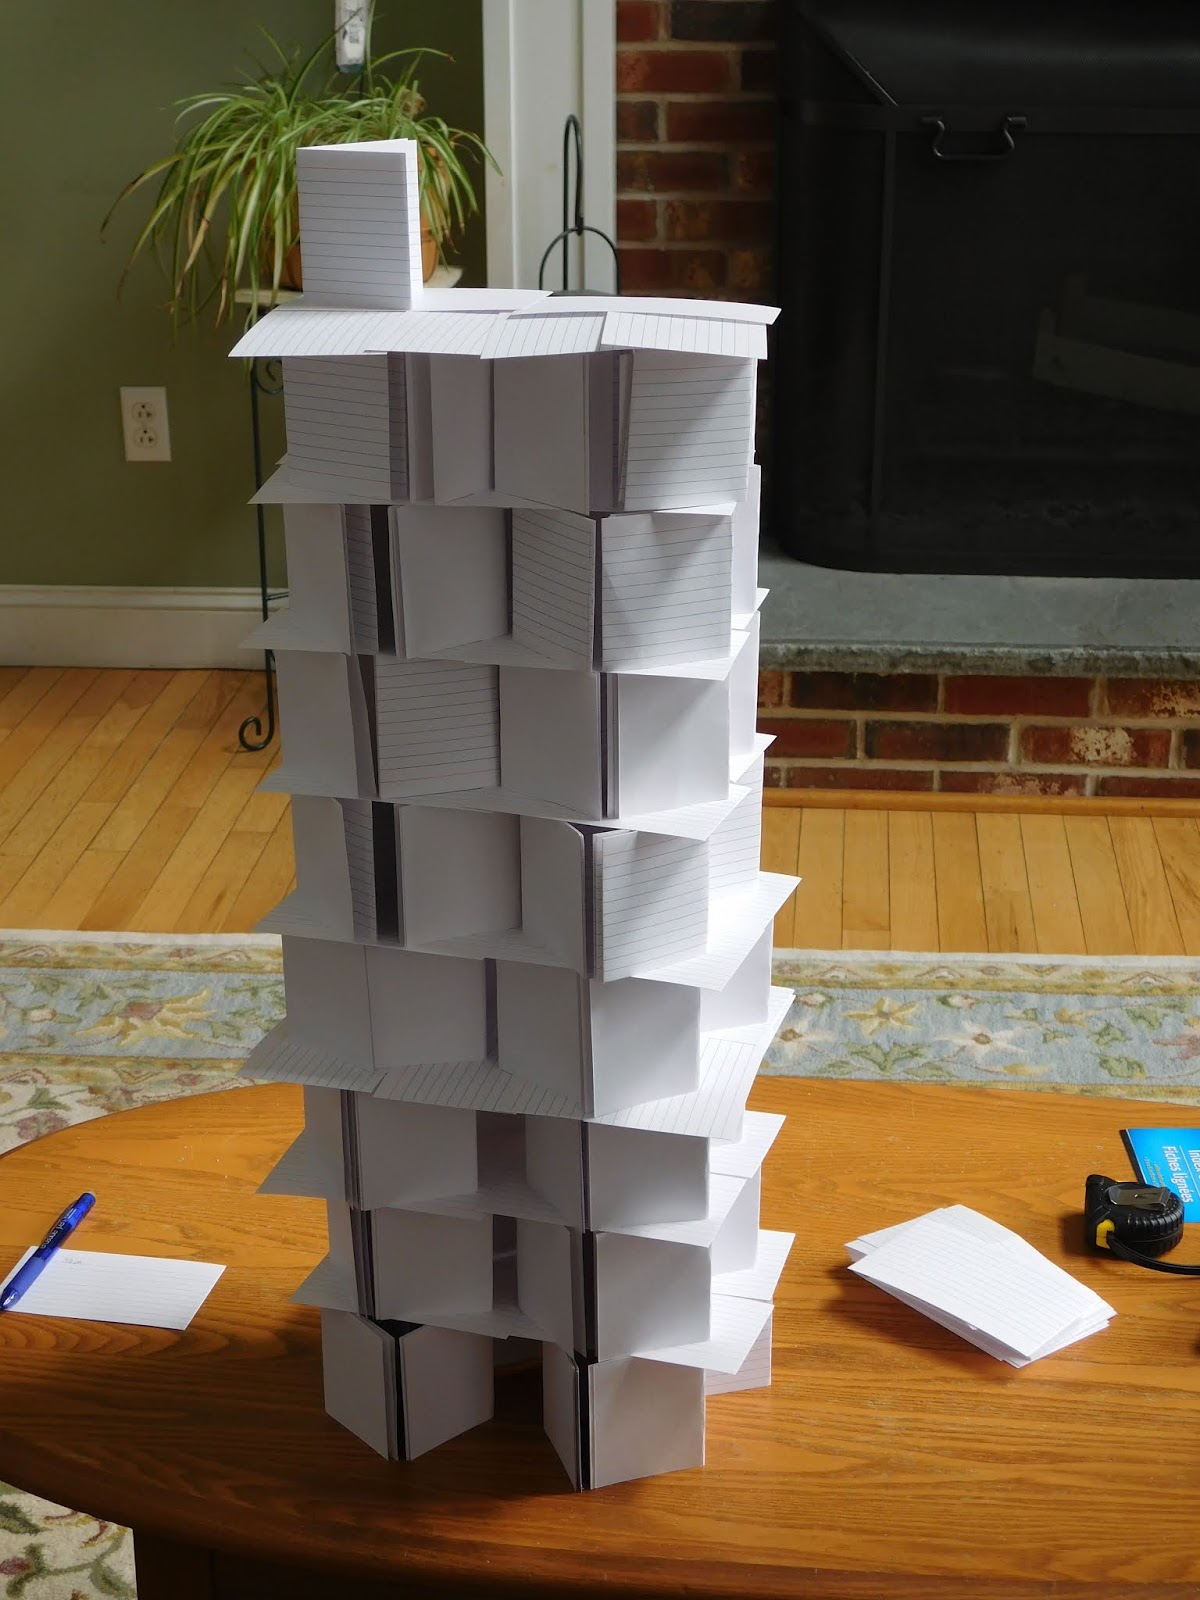 Index Card STEM Towers - STEM Activities for Kids